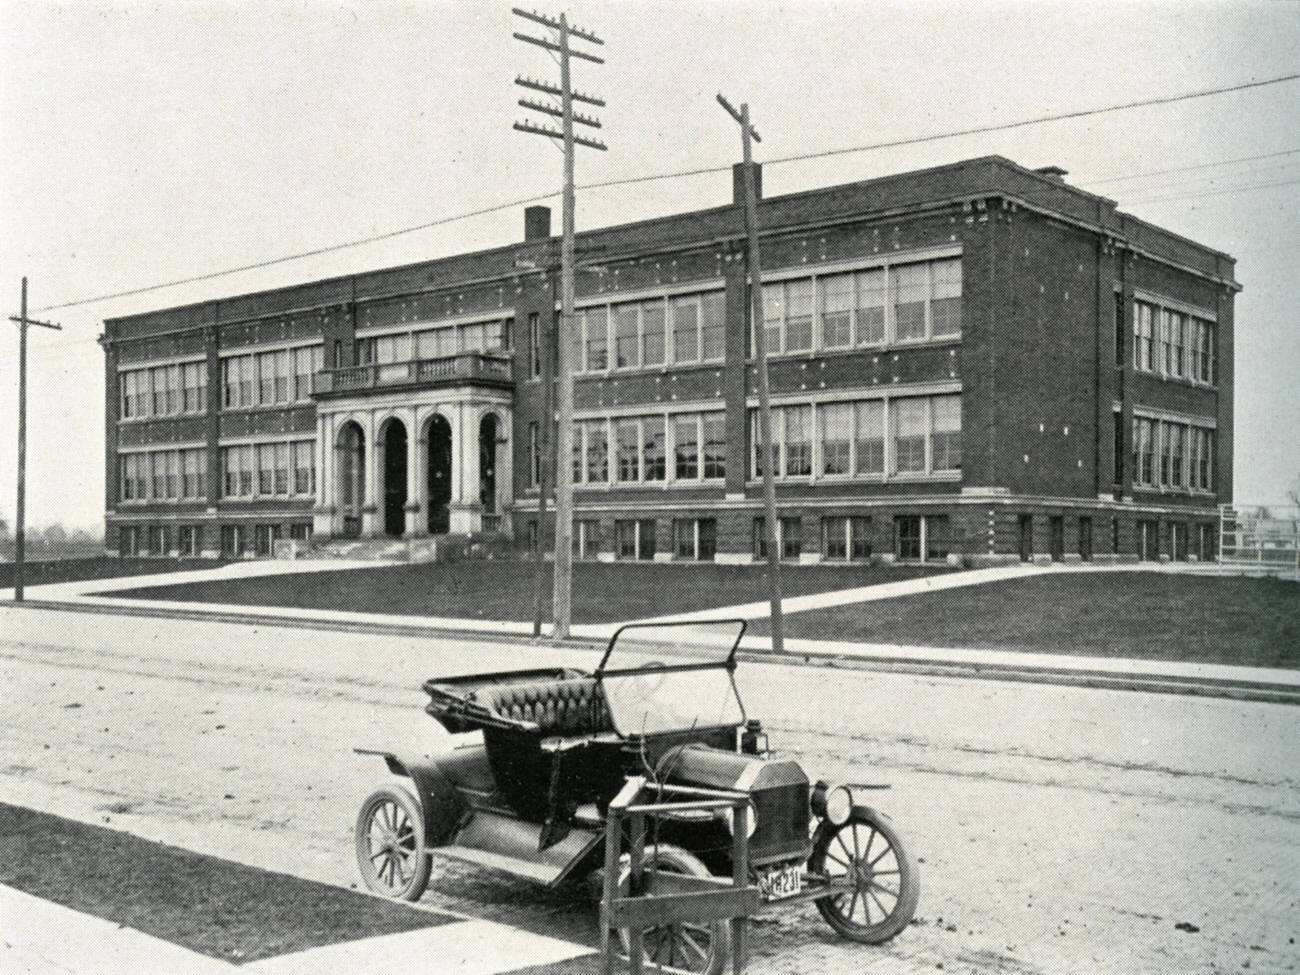 Hague Avenue Elementary School, constructed in 1910 with an addition in 1926, Circa May 1915.